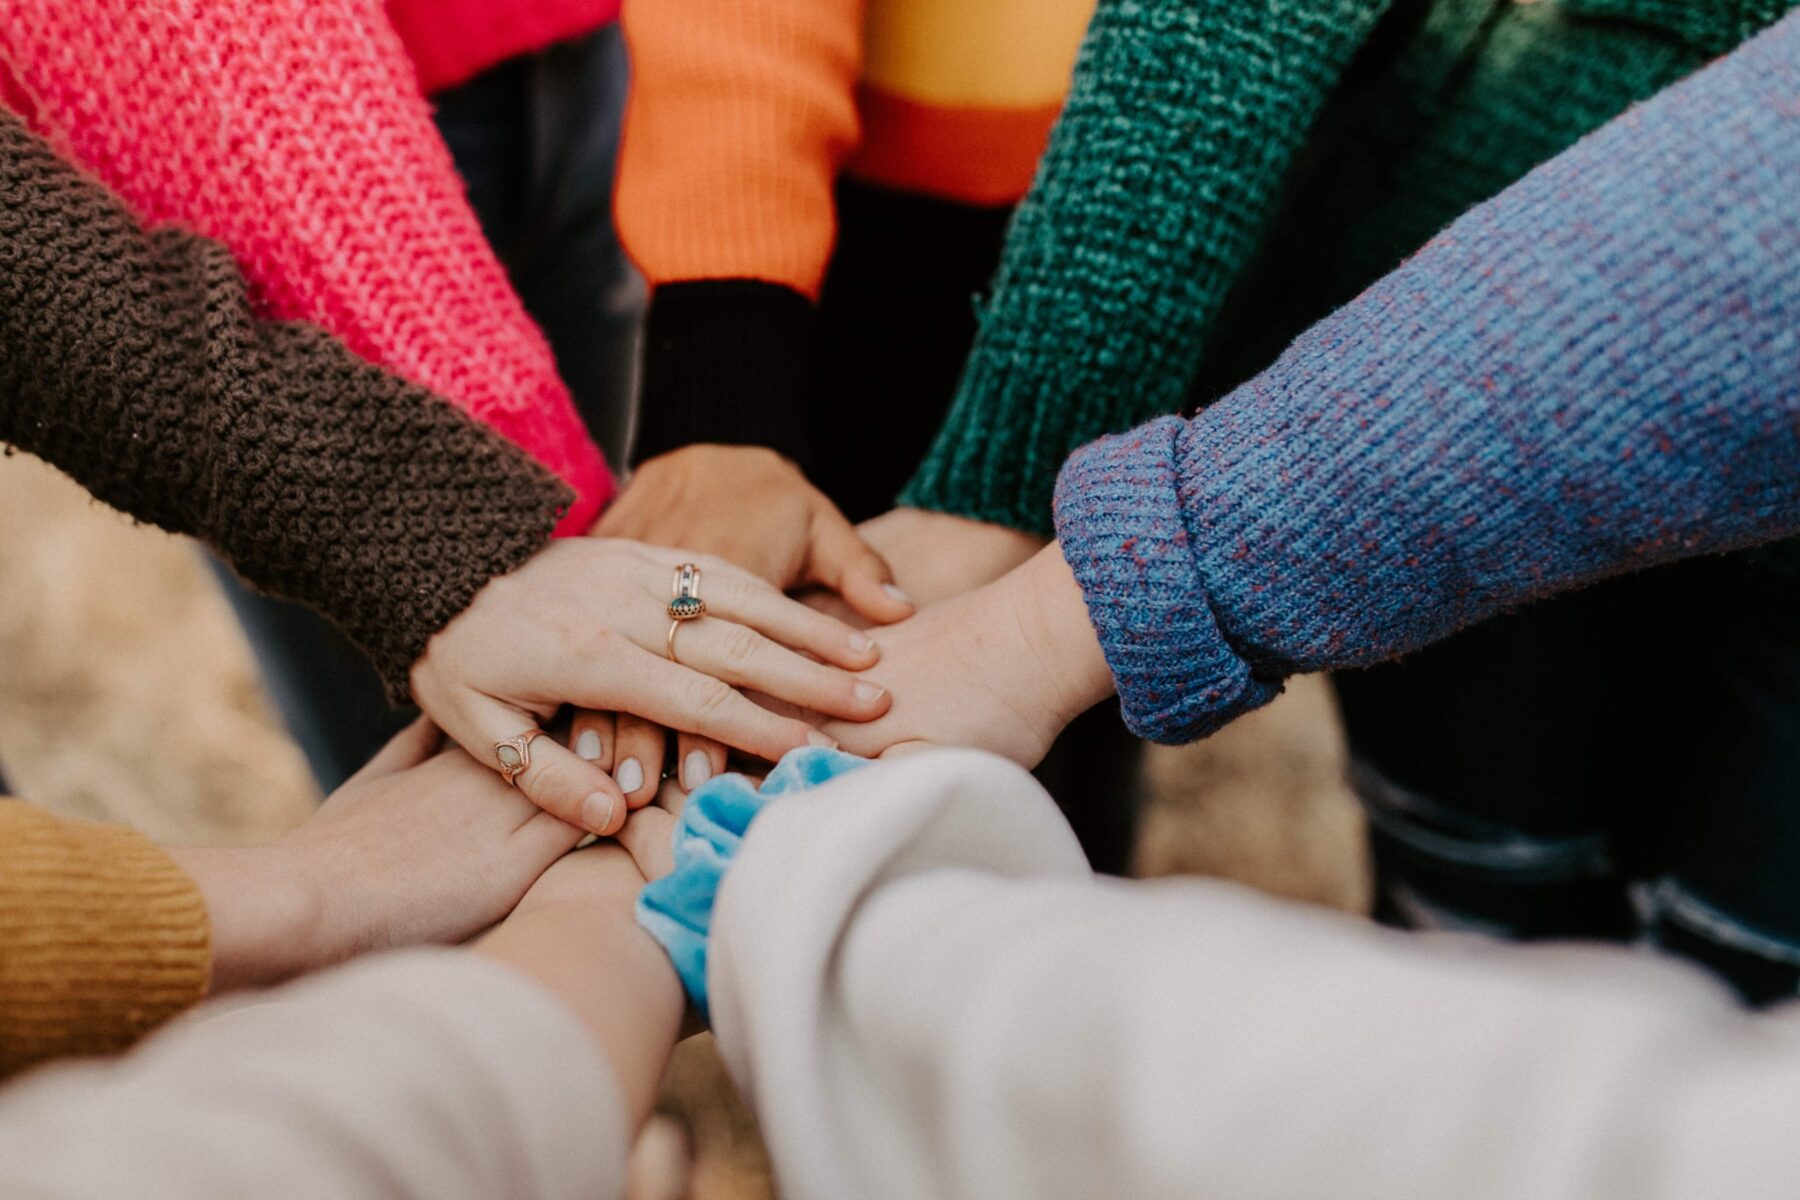 people placing their hands together in a circle as a sign of teamwork